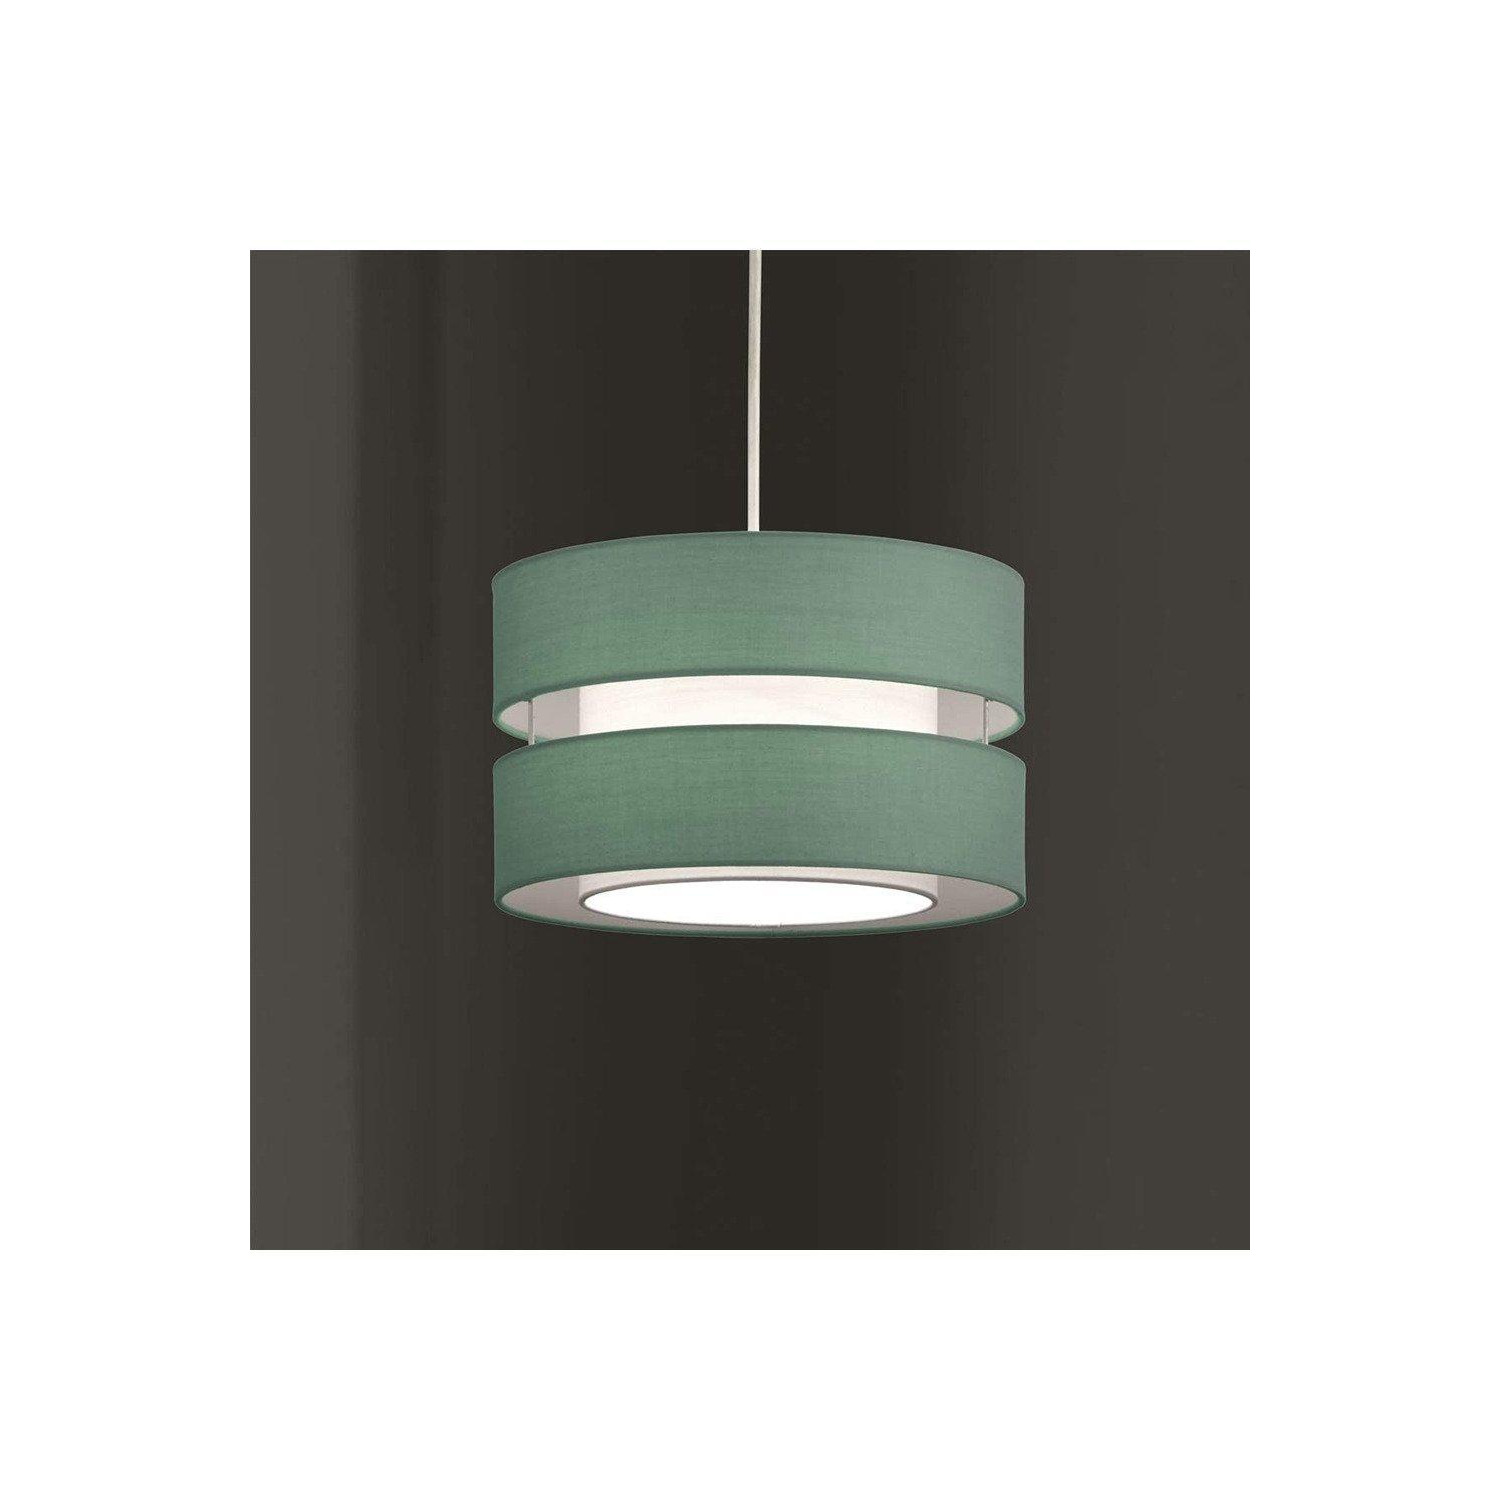 'Gayle' Teal Two Tier Ceiling Shade - image 1